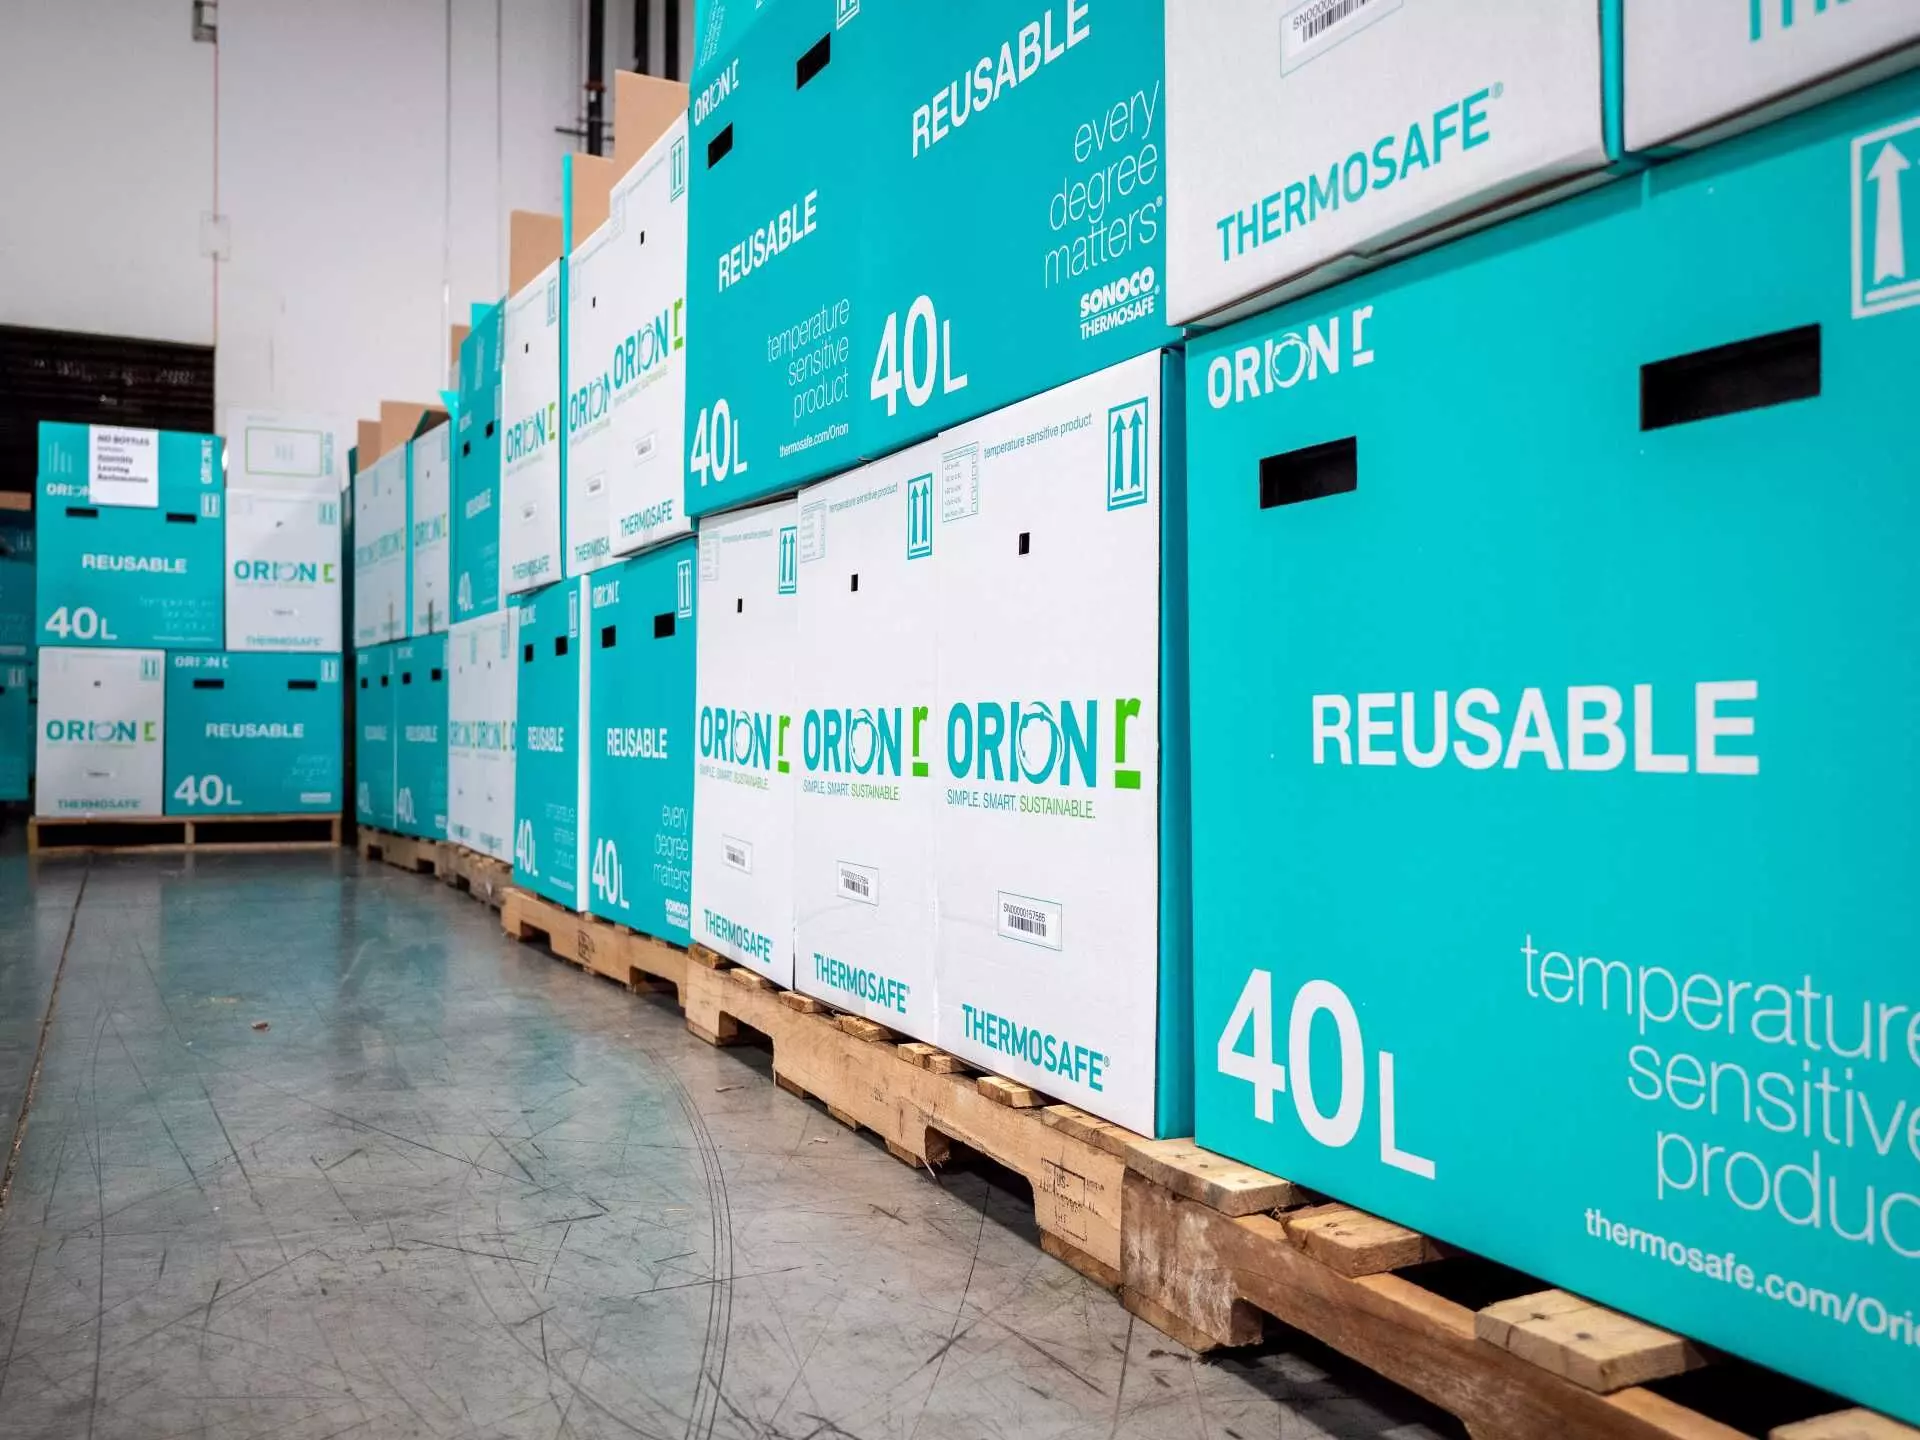 Sonoco ThermoSafe expands Orion Rental packaging program in Europe